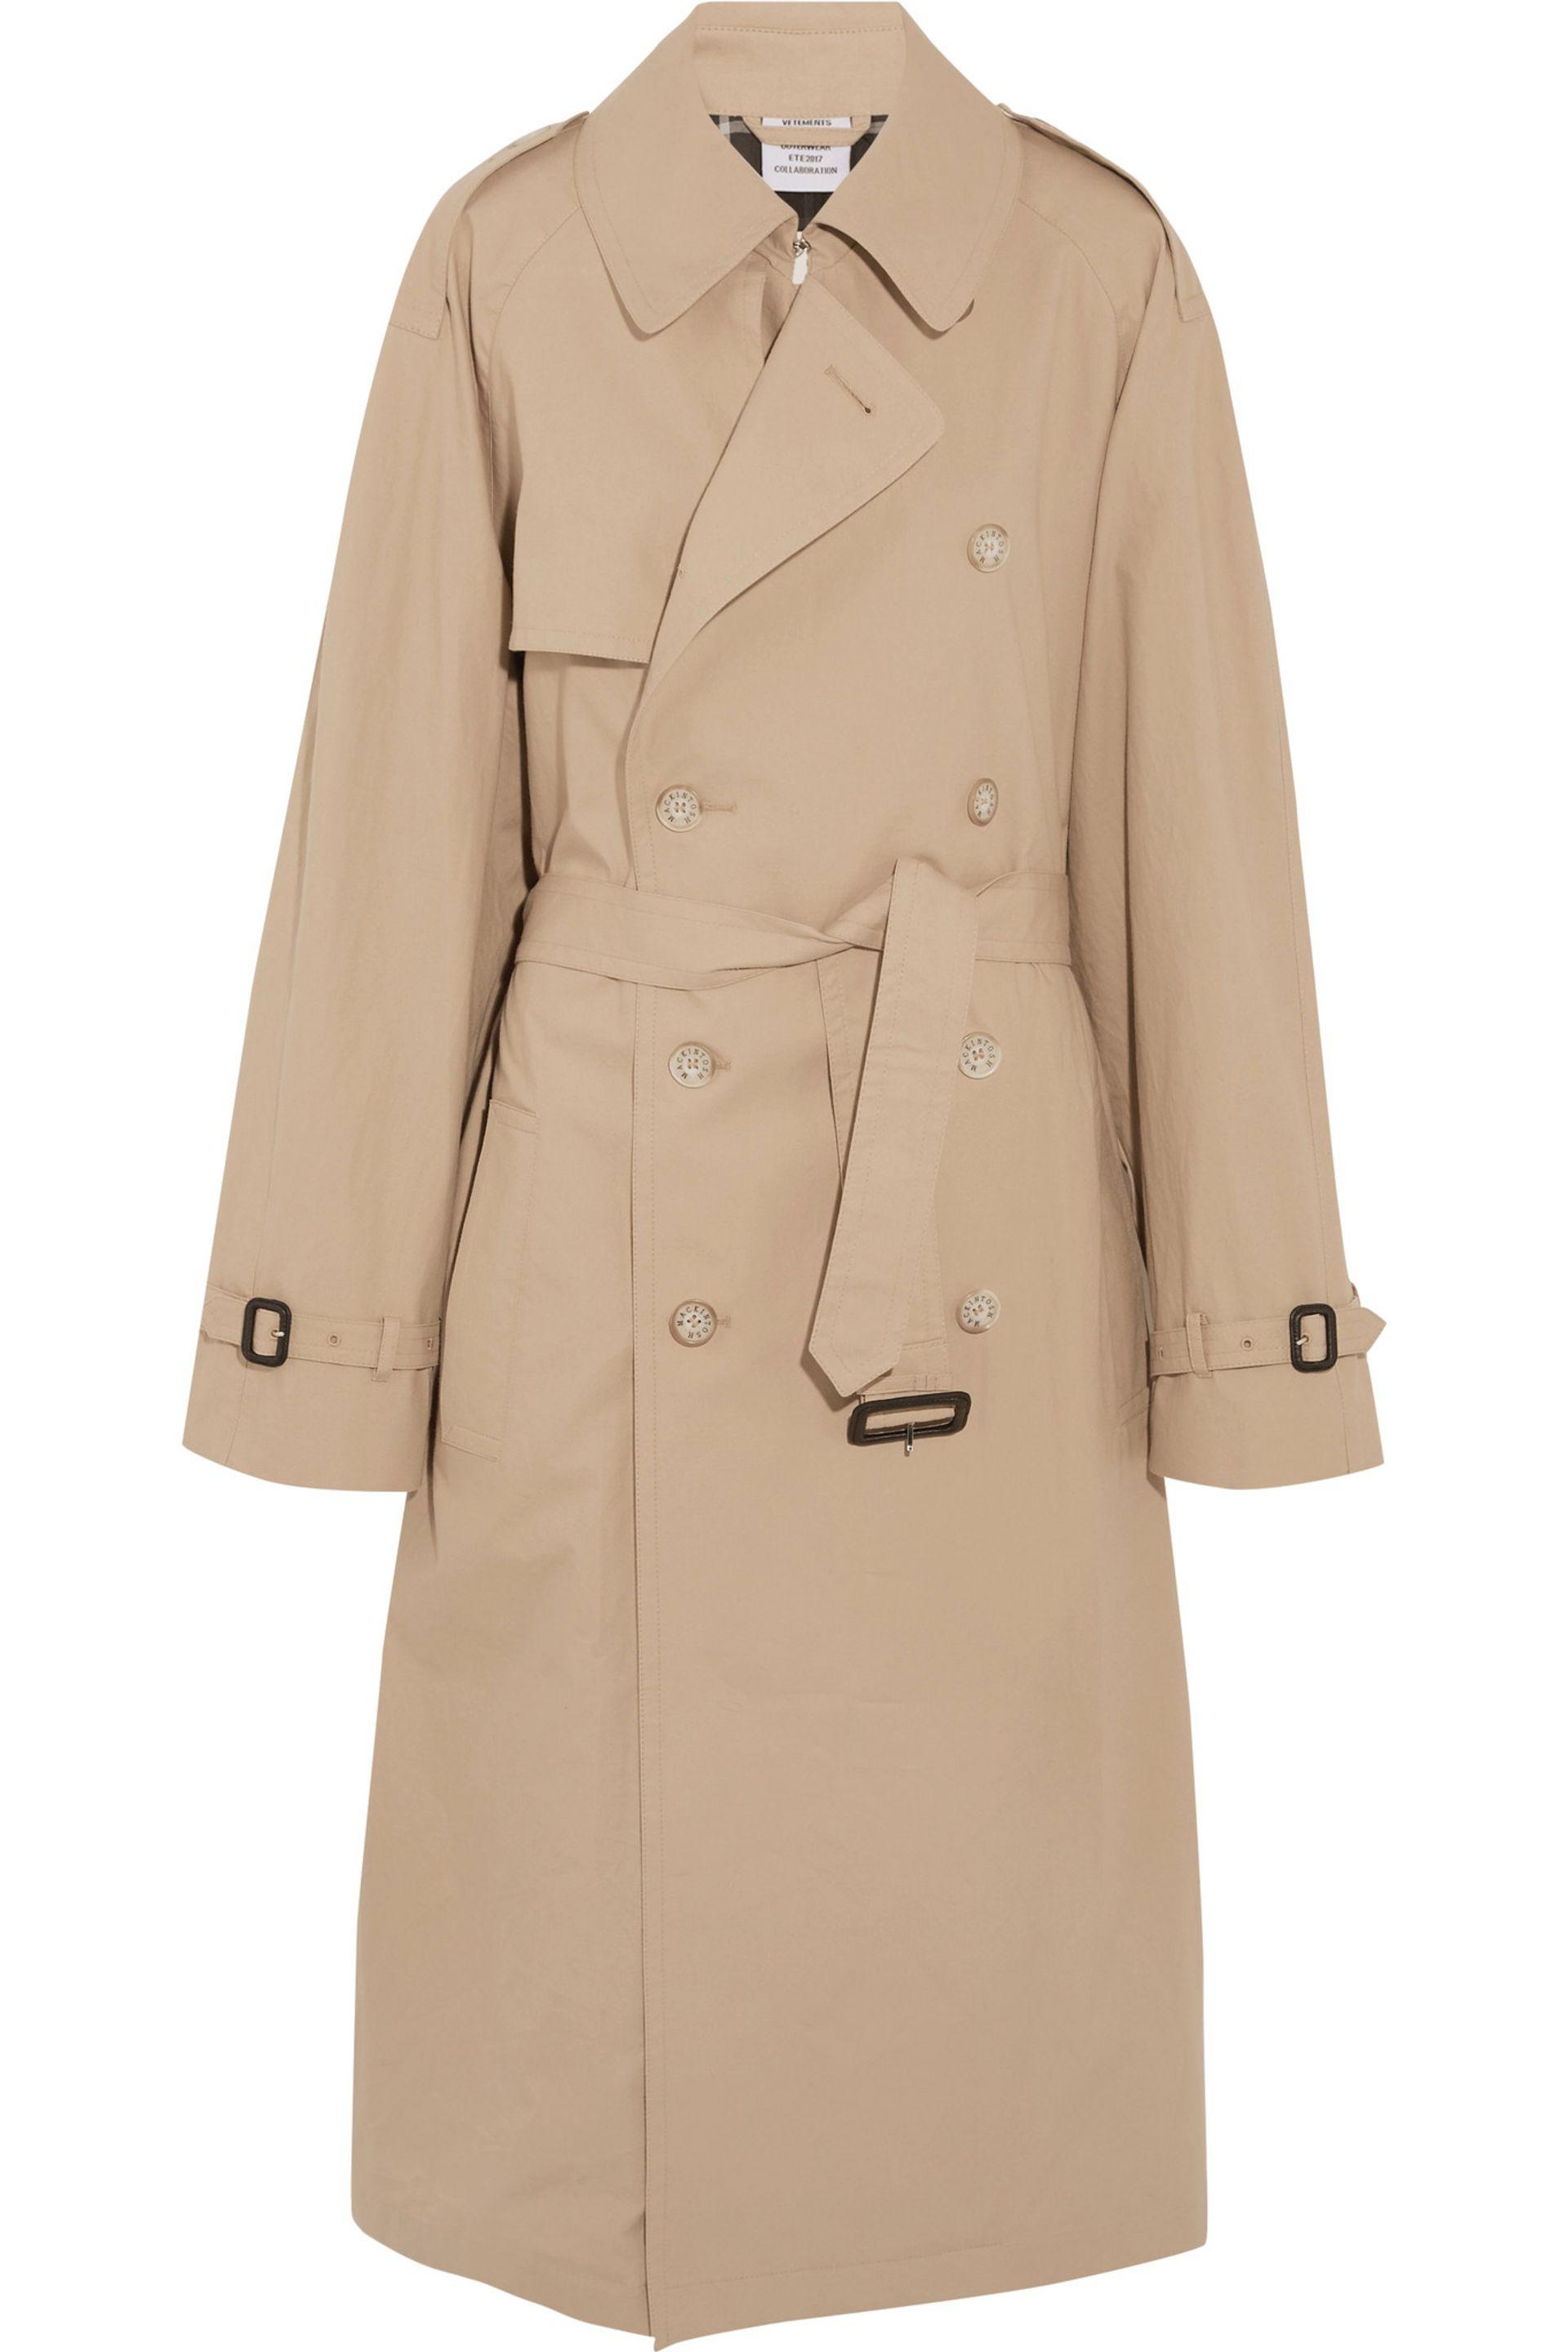 Vetements Mackintosh Oversized Cotton Trench Coat in Beige (Natural) - Lyst